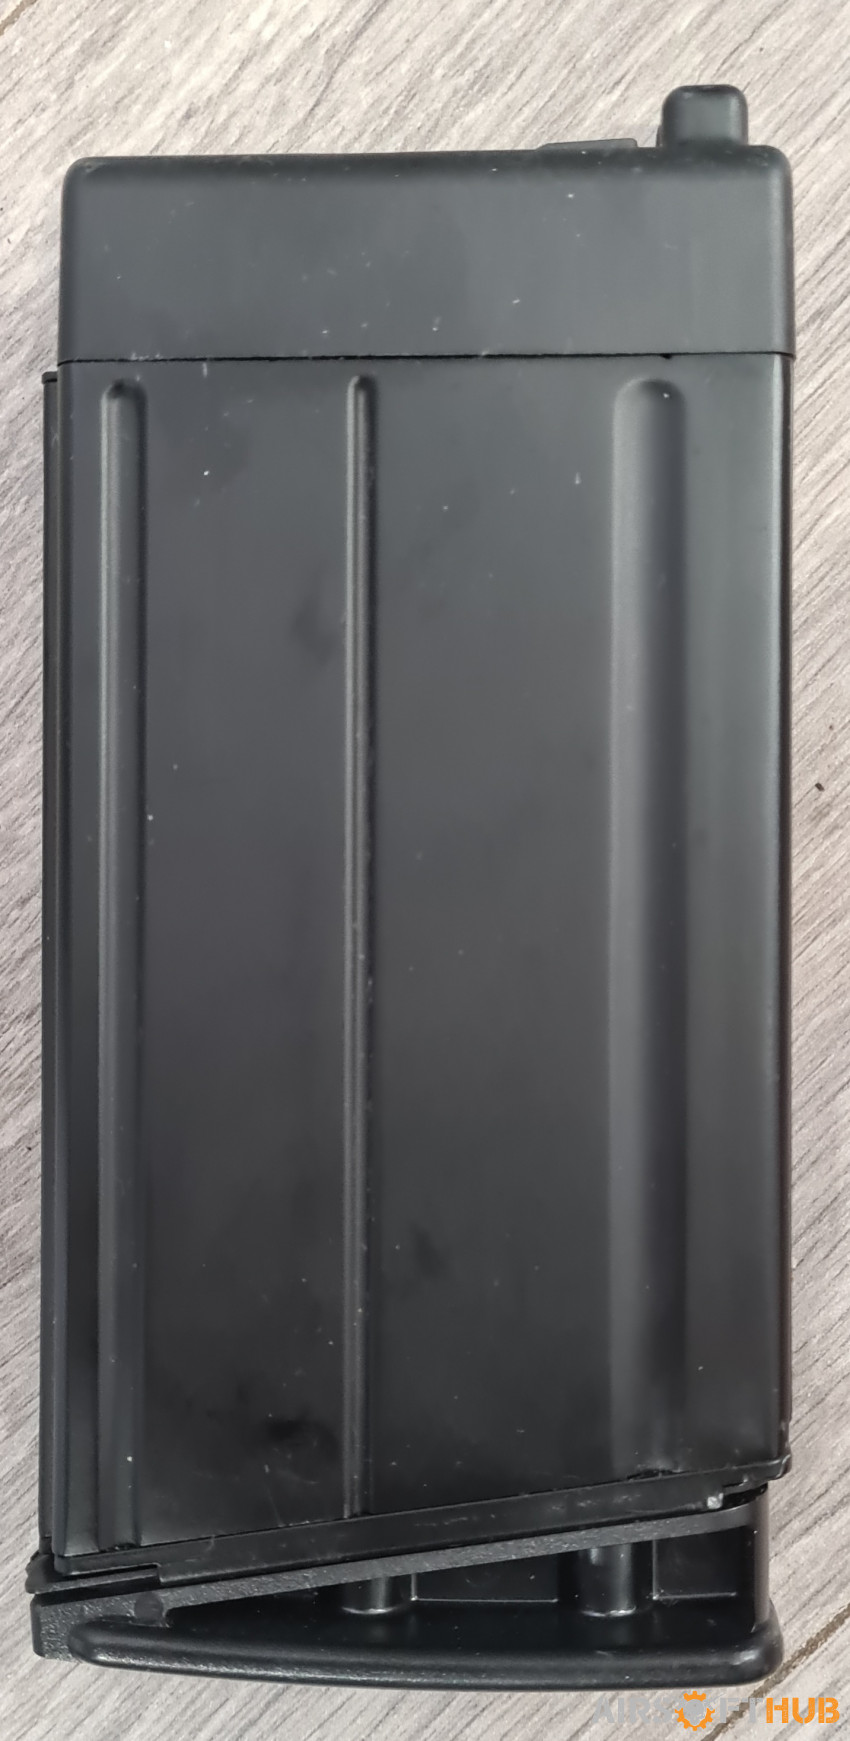 Scar GBB mag - Used airsoft equipment